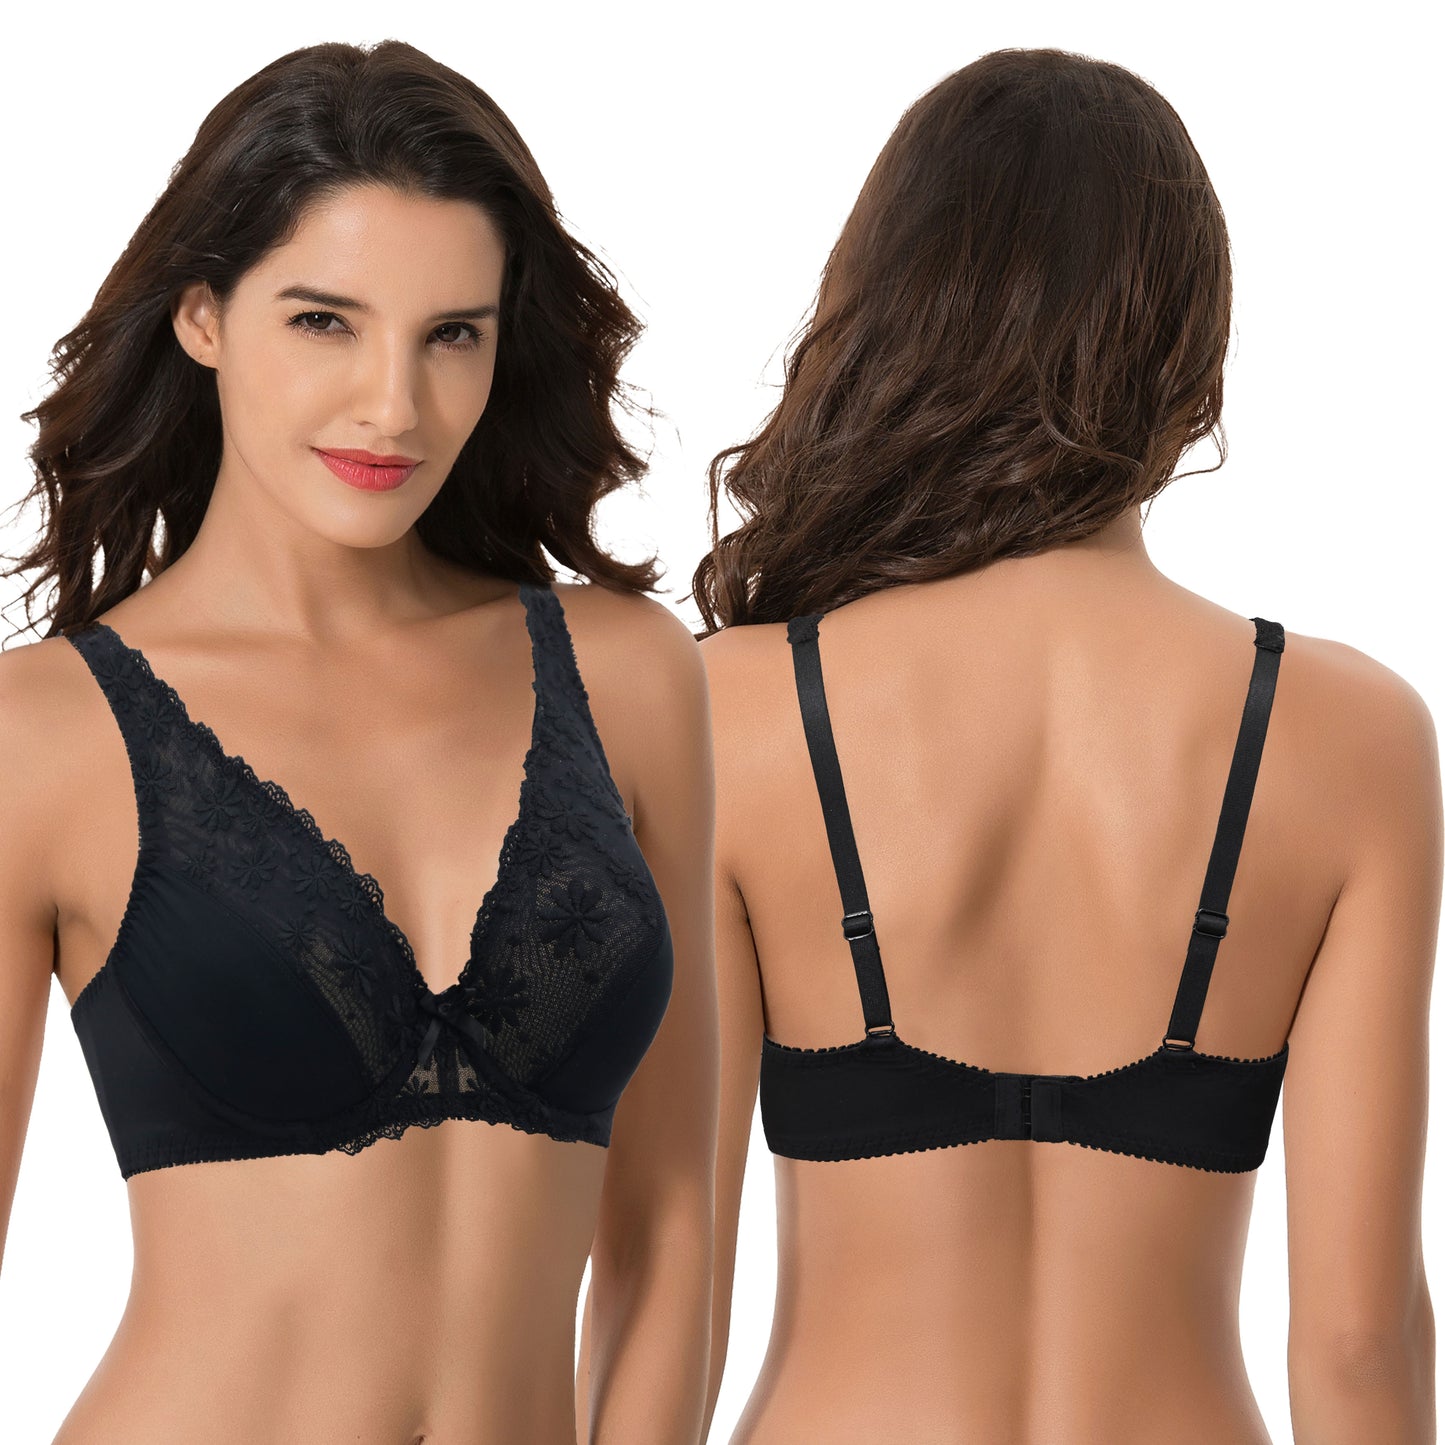 Women Plus Size Minimizer Underwire Unlined Bra with Embroidery Mesh